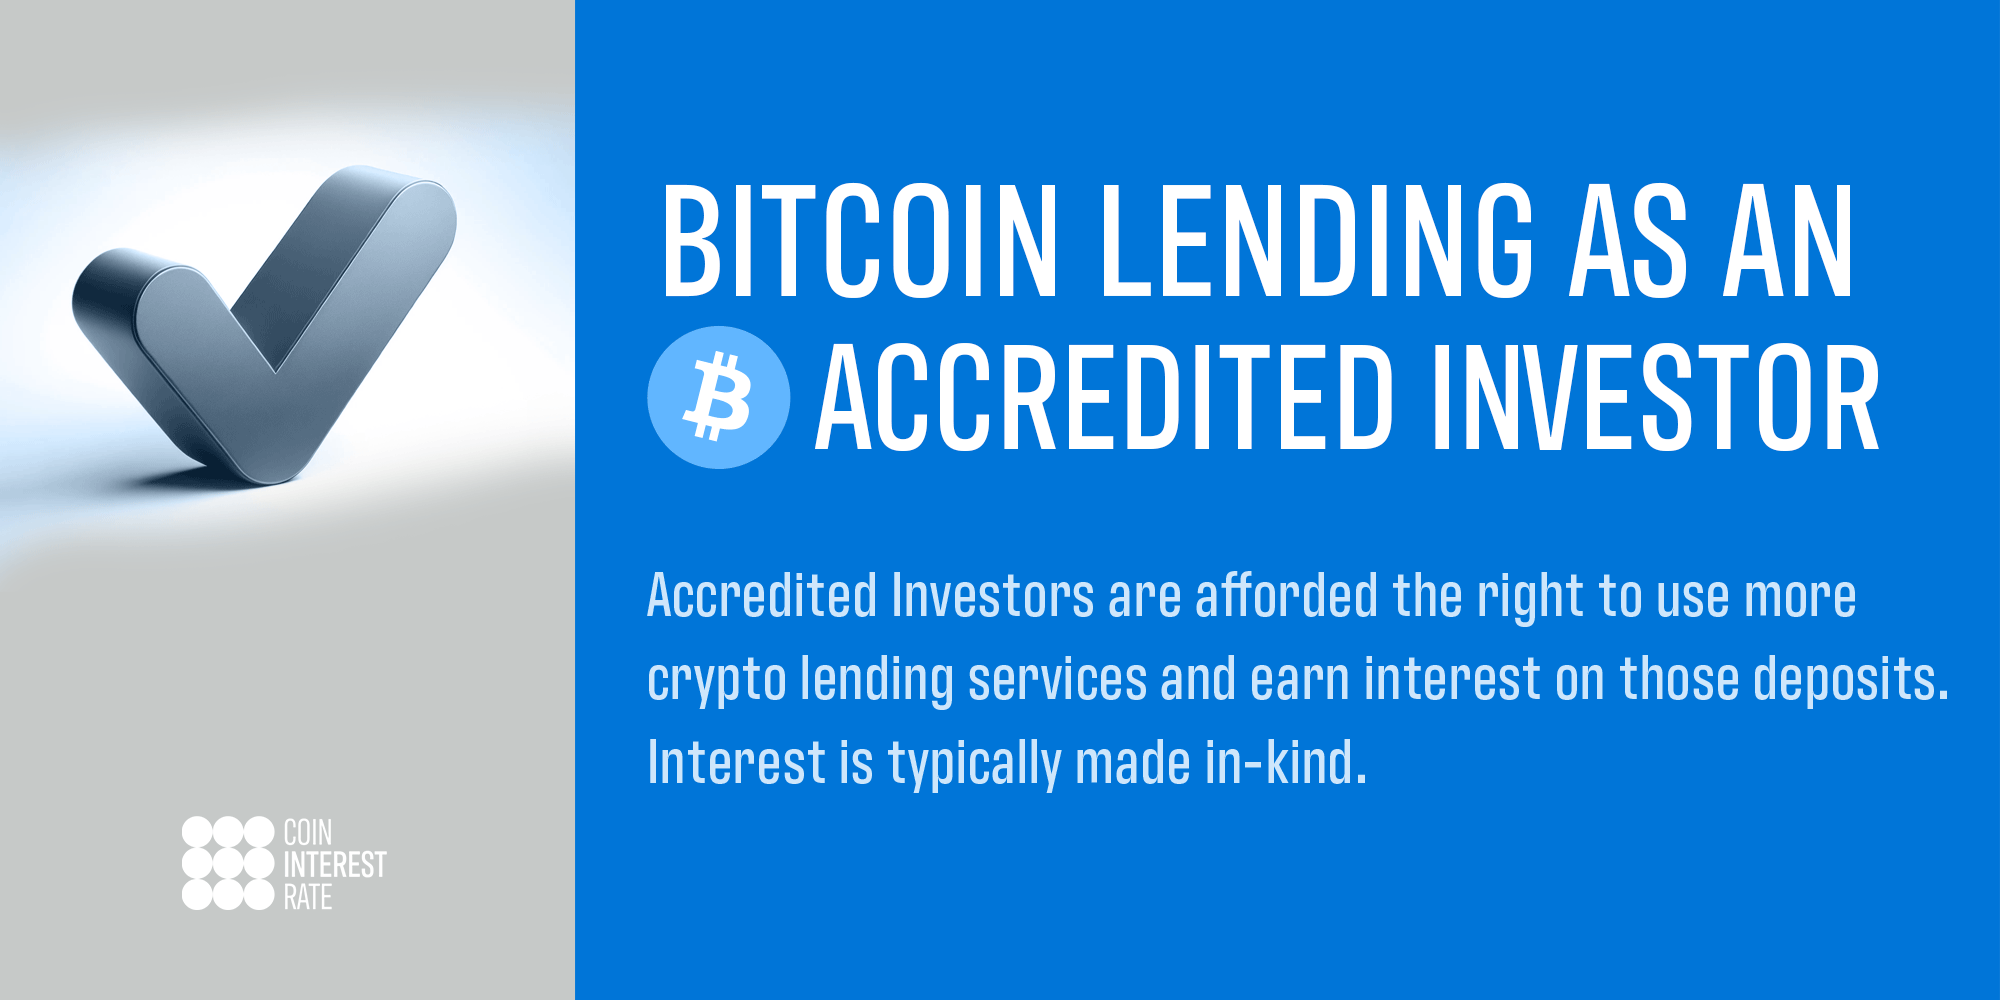 Bitcoin Lending as an Accredited Investor: Accredited Investors are afforded the right to use more crypto lending services and earn interest on those deposits. Interest is typically made in-kind.